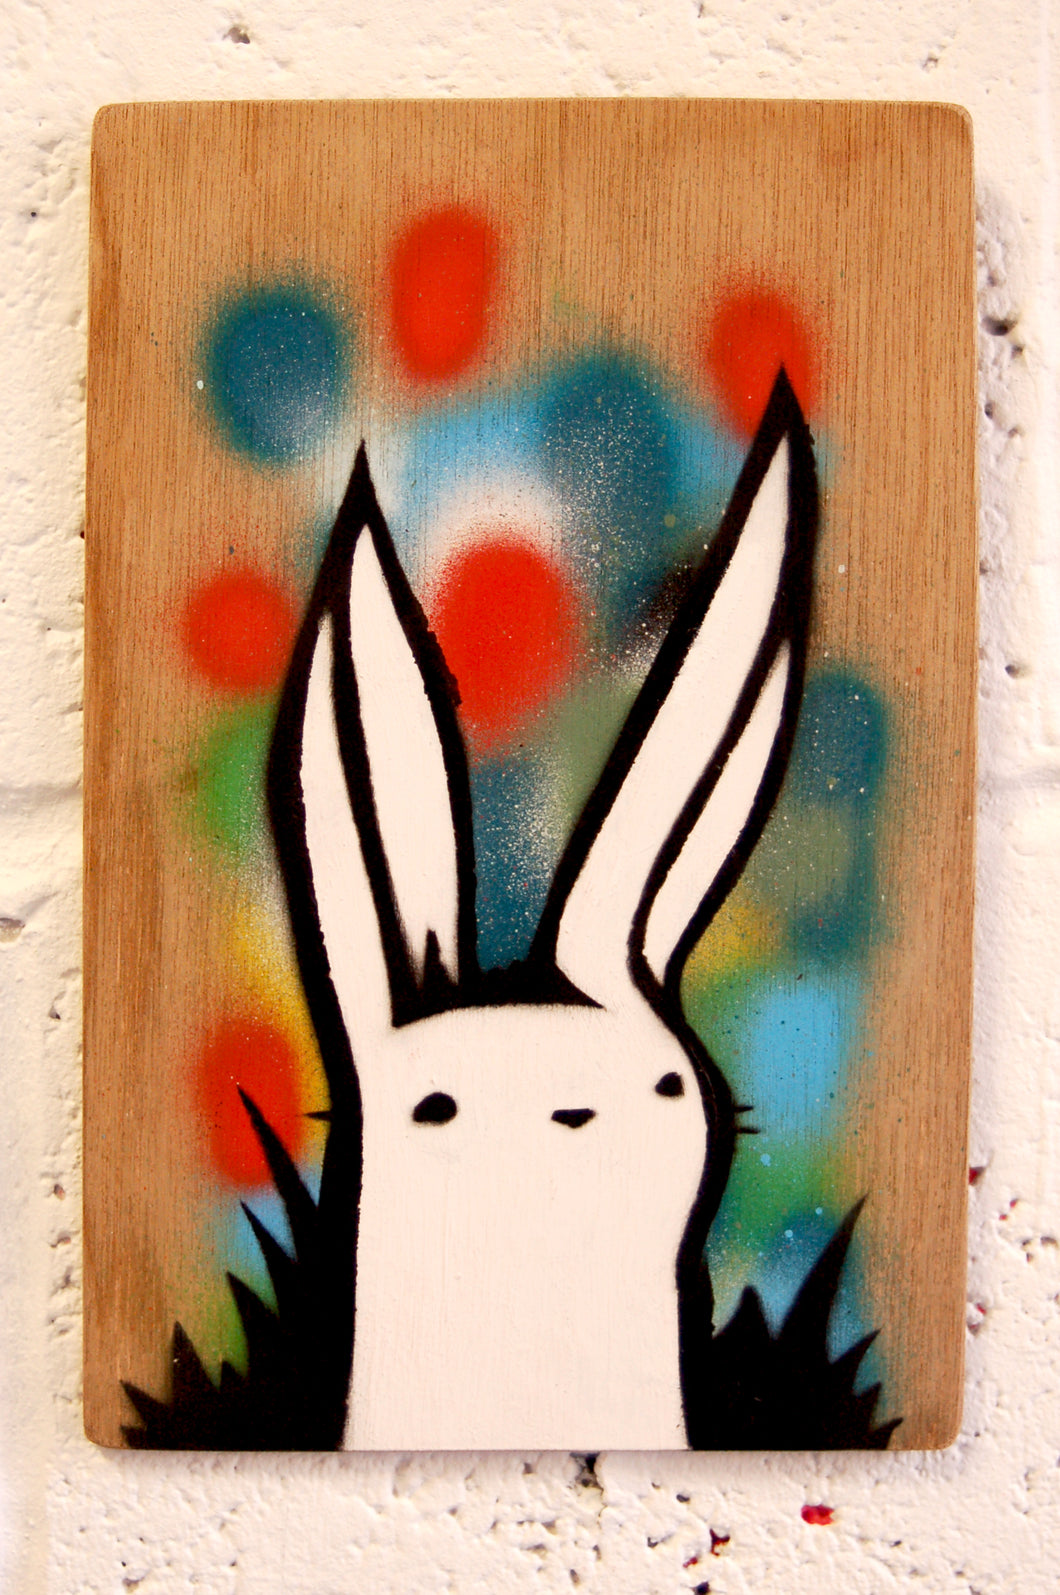 Original contemporary art, spray paint and stencil on board by Brighton artist Cassettelord